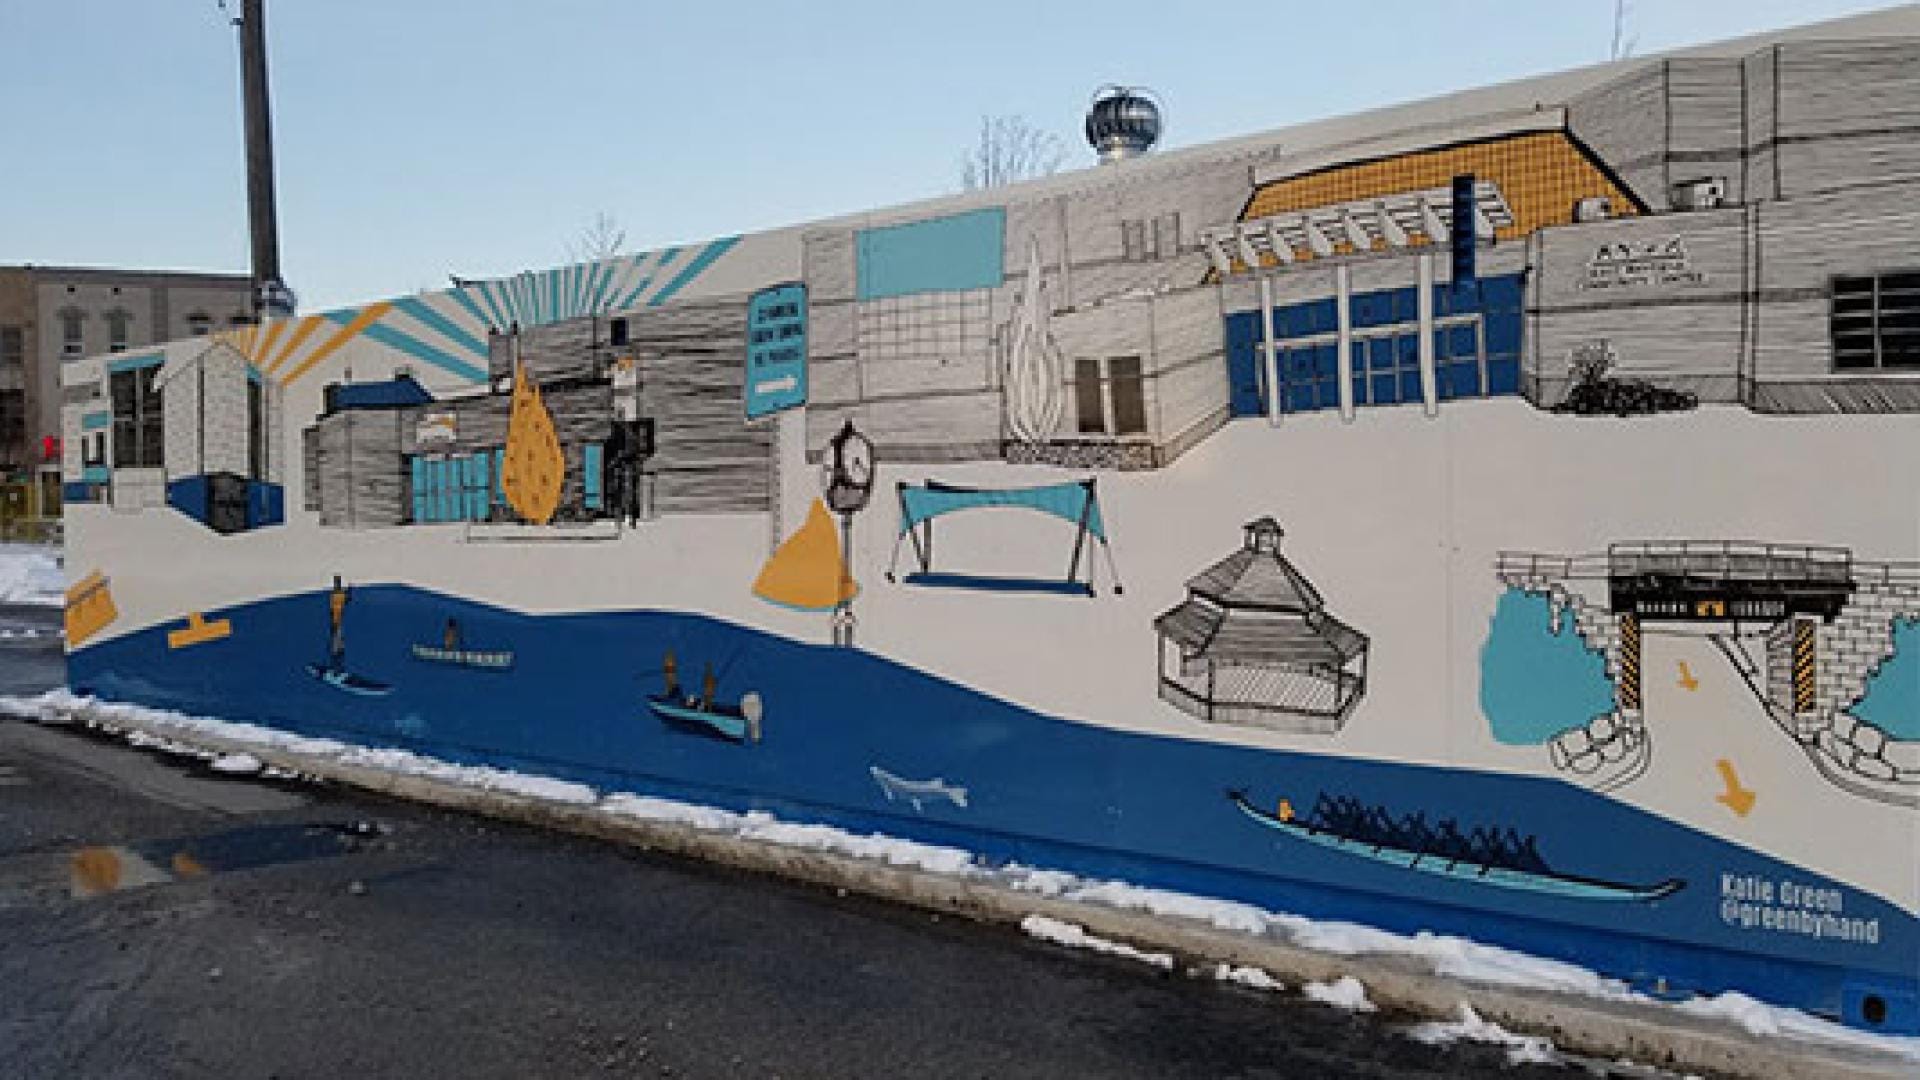 Mural painted on a storage facility